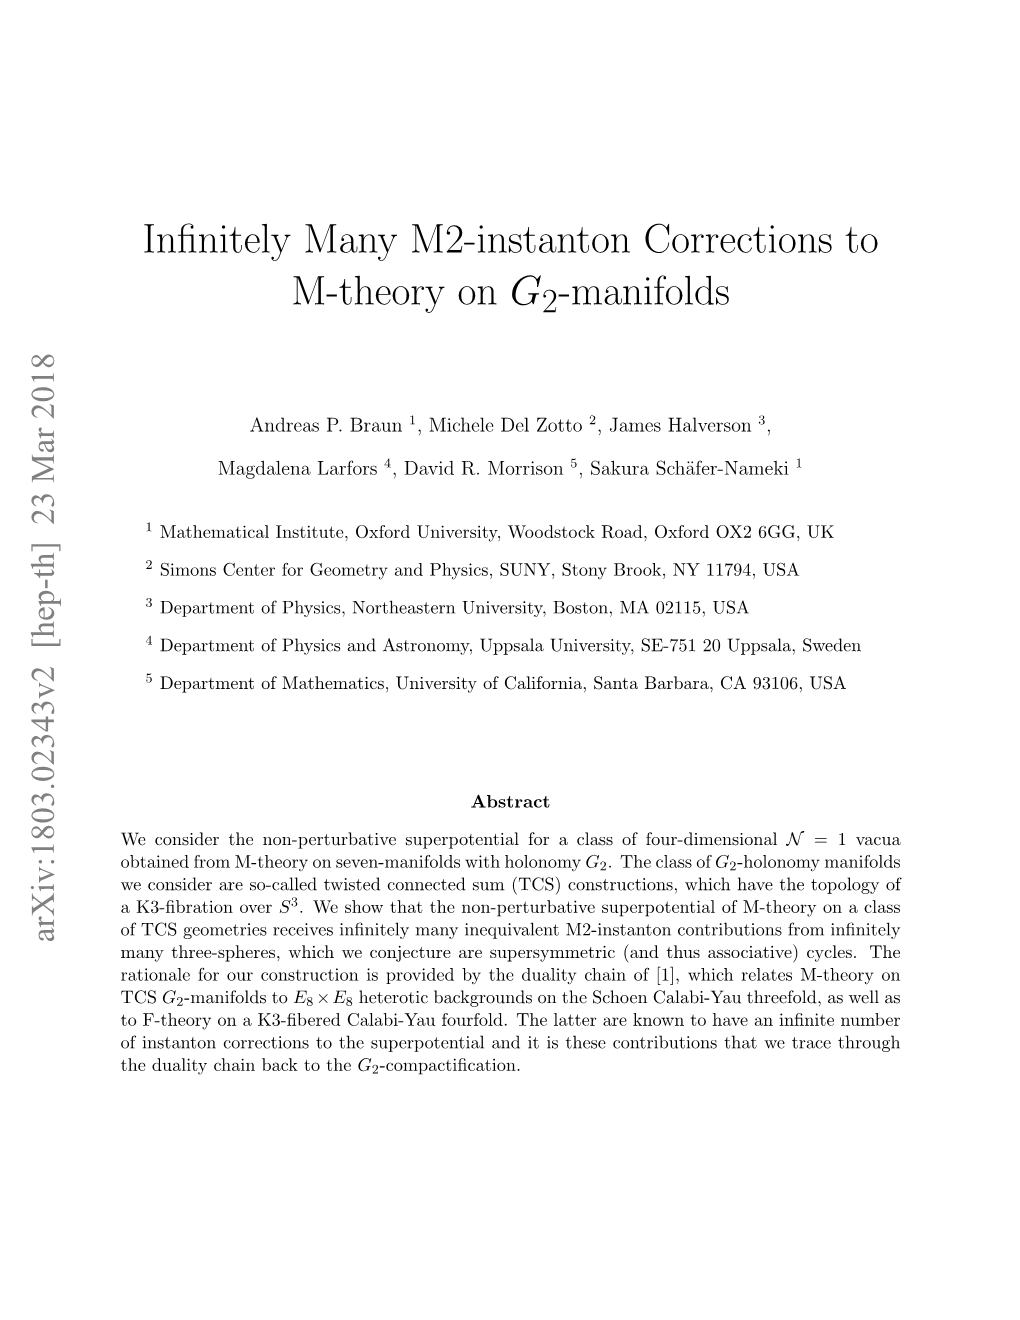 Infinitely Many M2-Instanton Corrections to M-Theory on G2